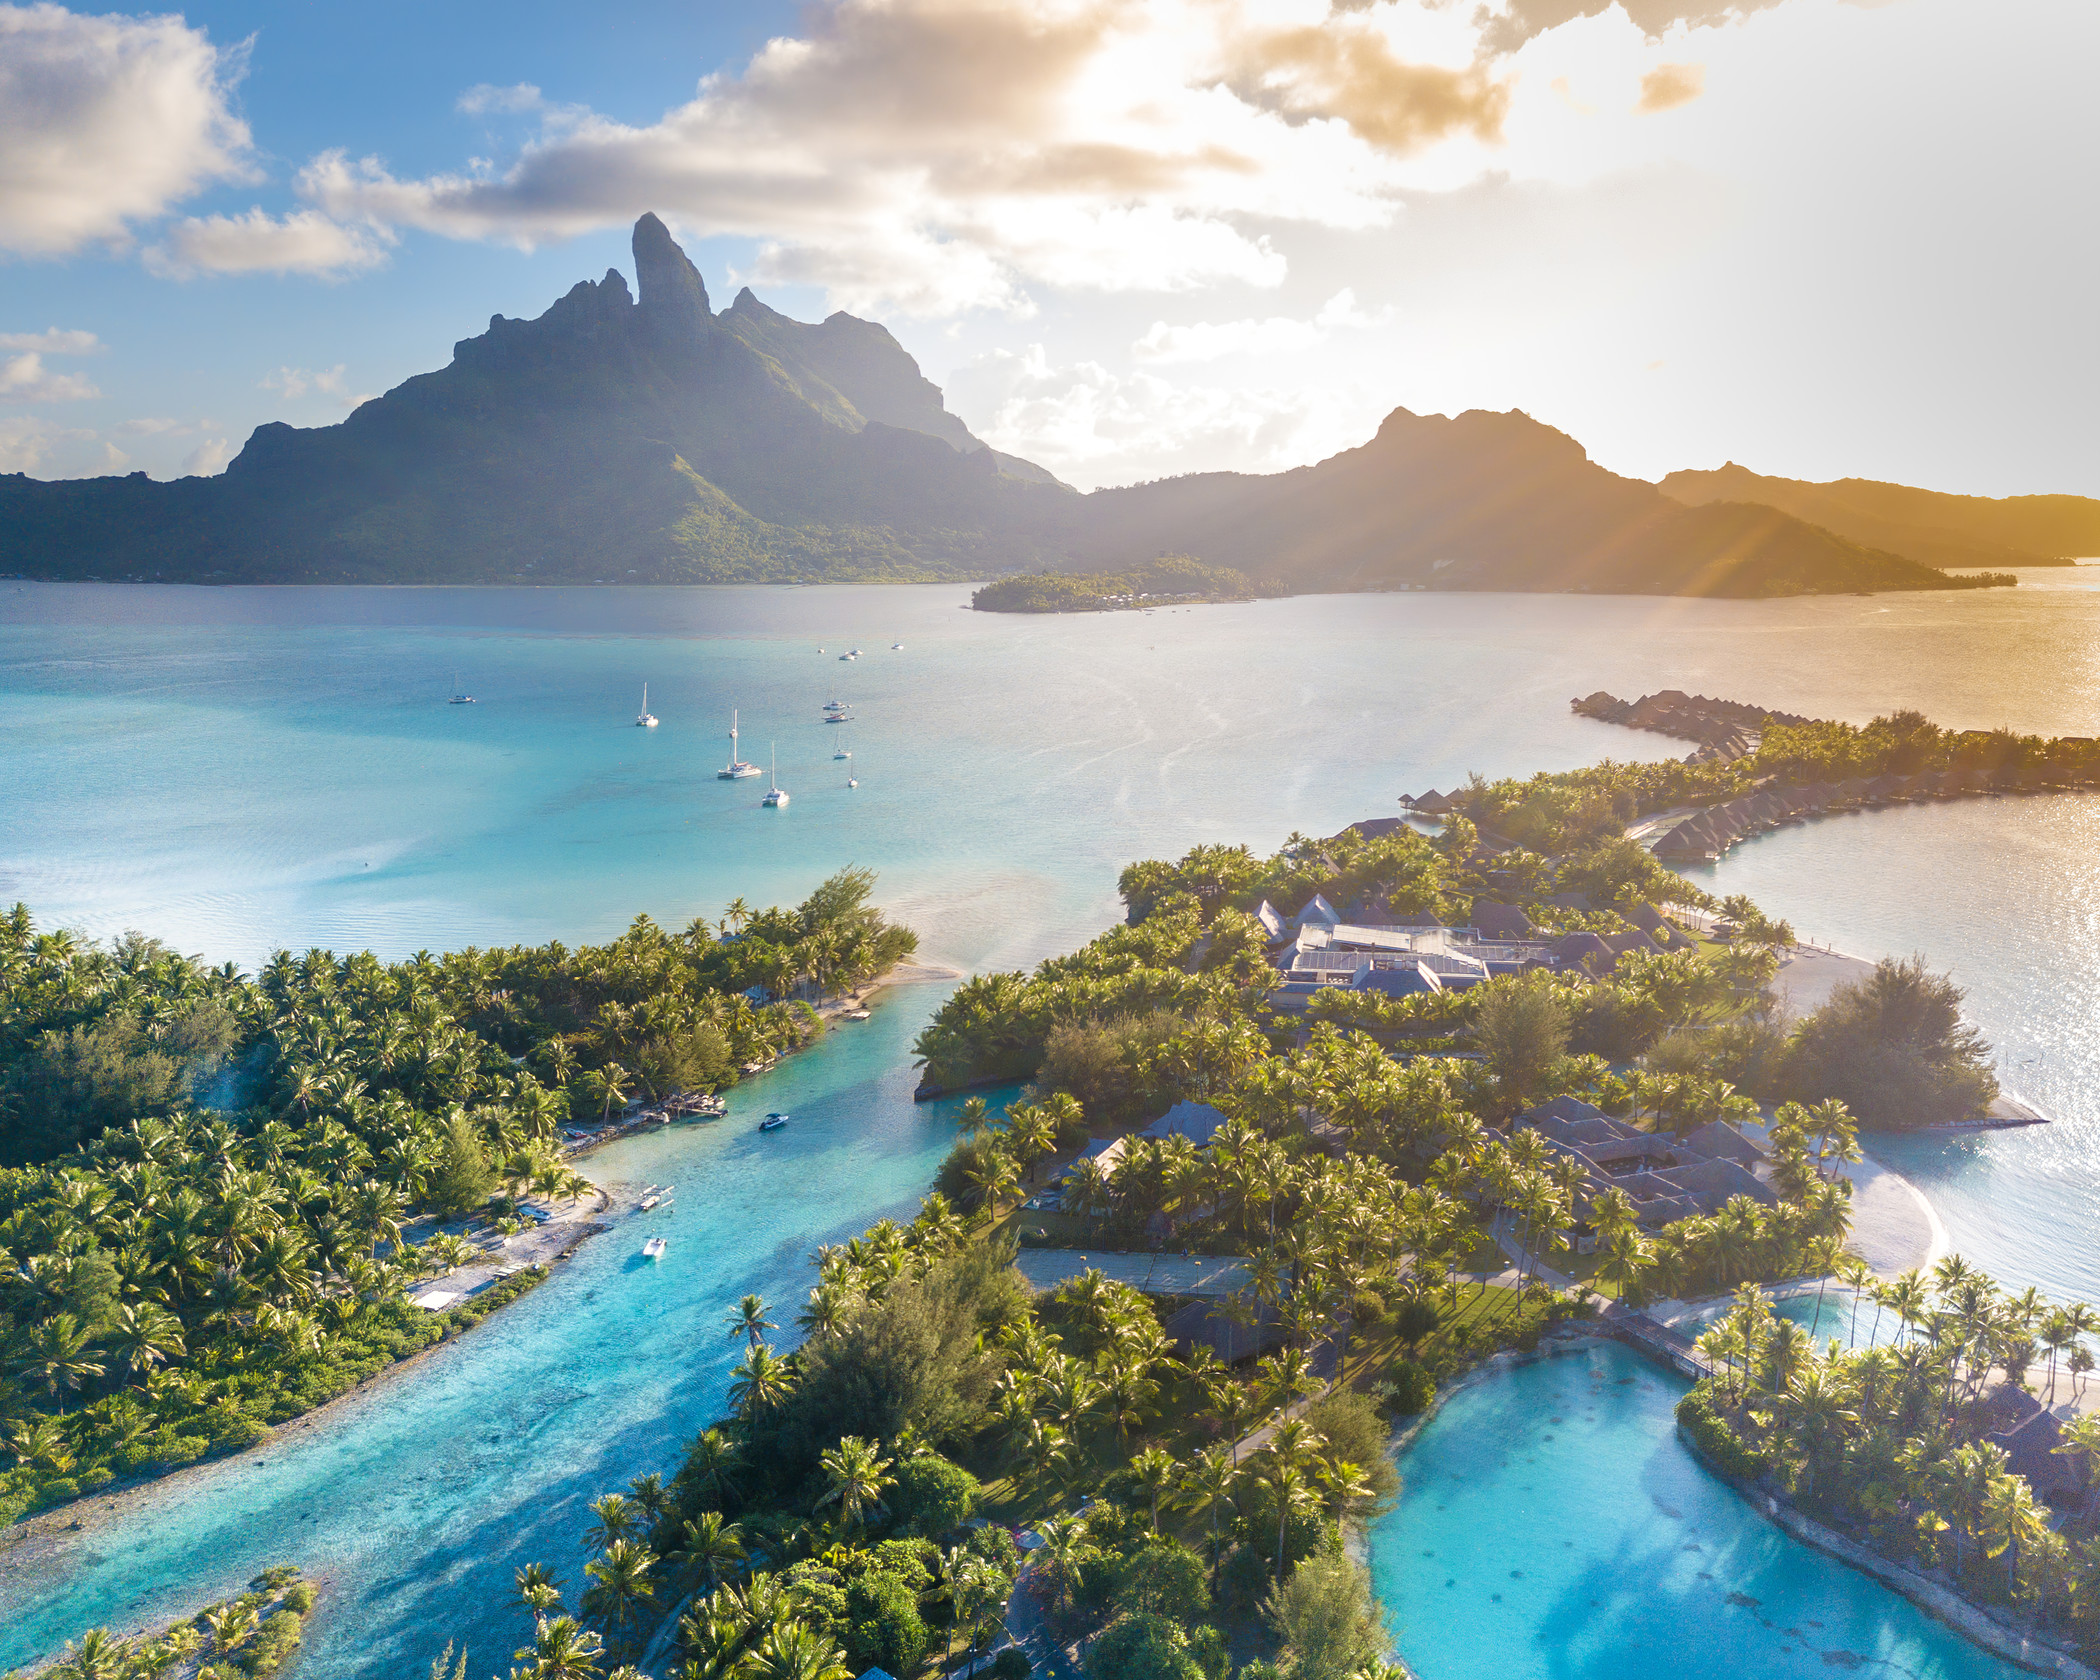 Protecting the land is one of the missions of The St. Regis Bora Bora's Natura Ora sustainability initiative.